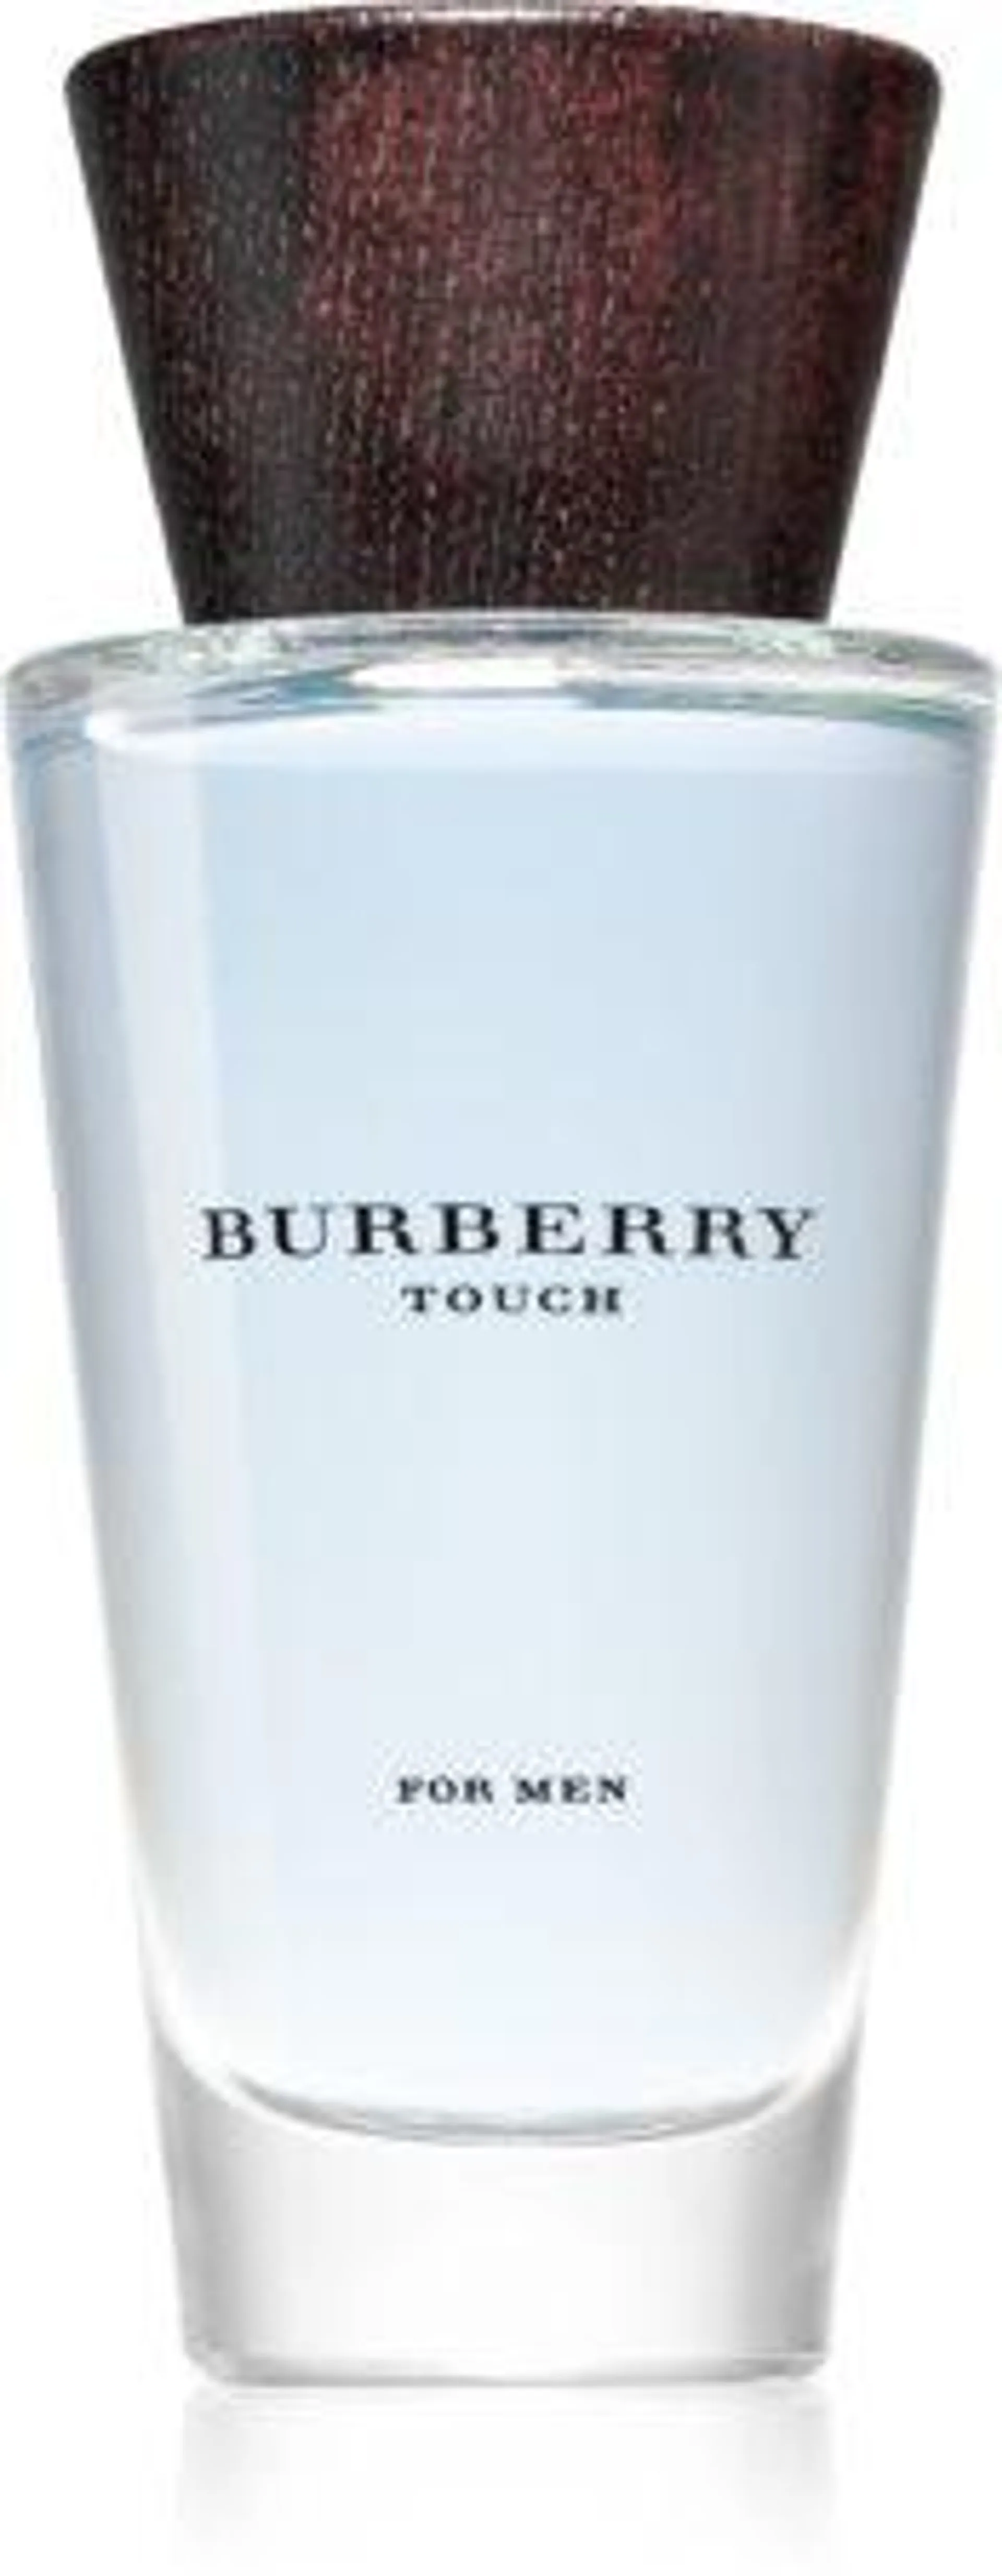 Touch for Men